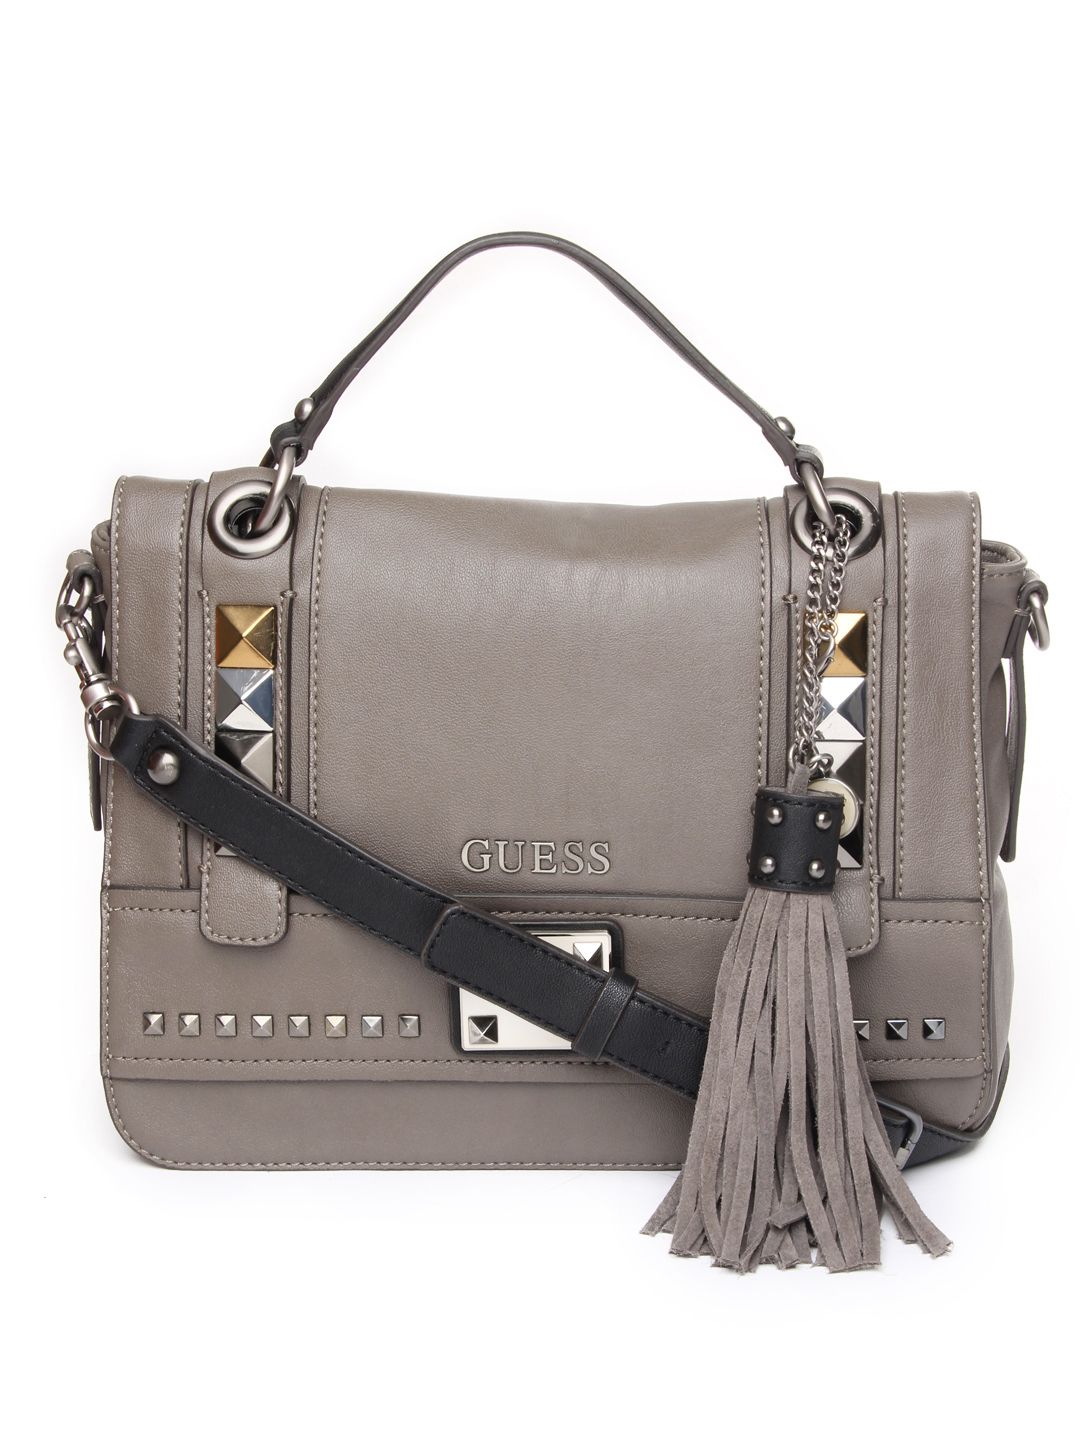 15 Trendy Designs of Guess Bags for Women in India